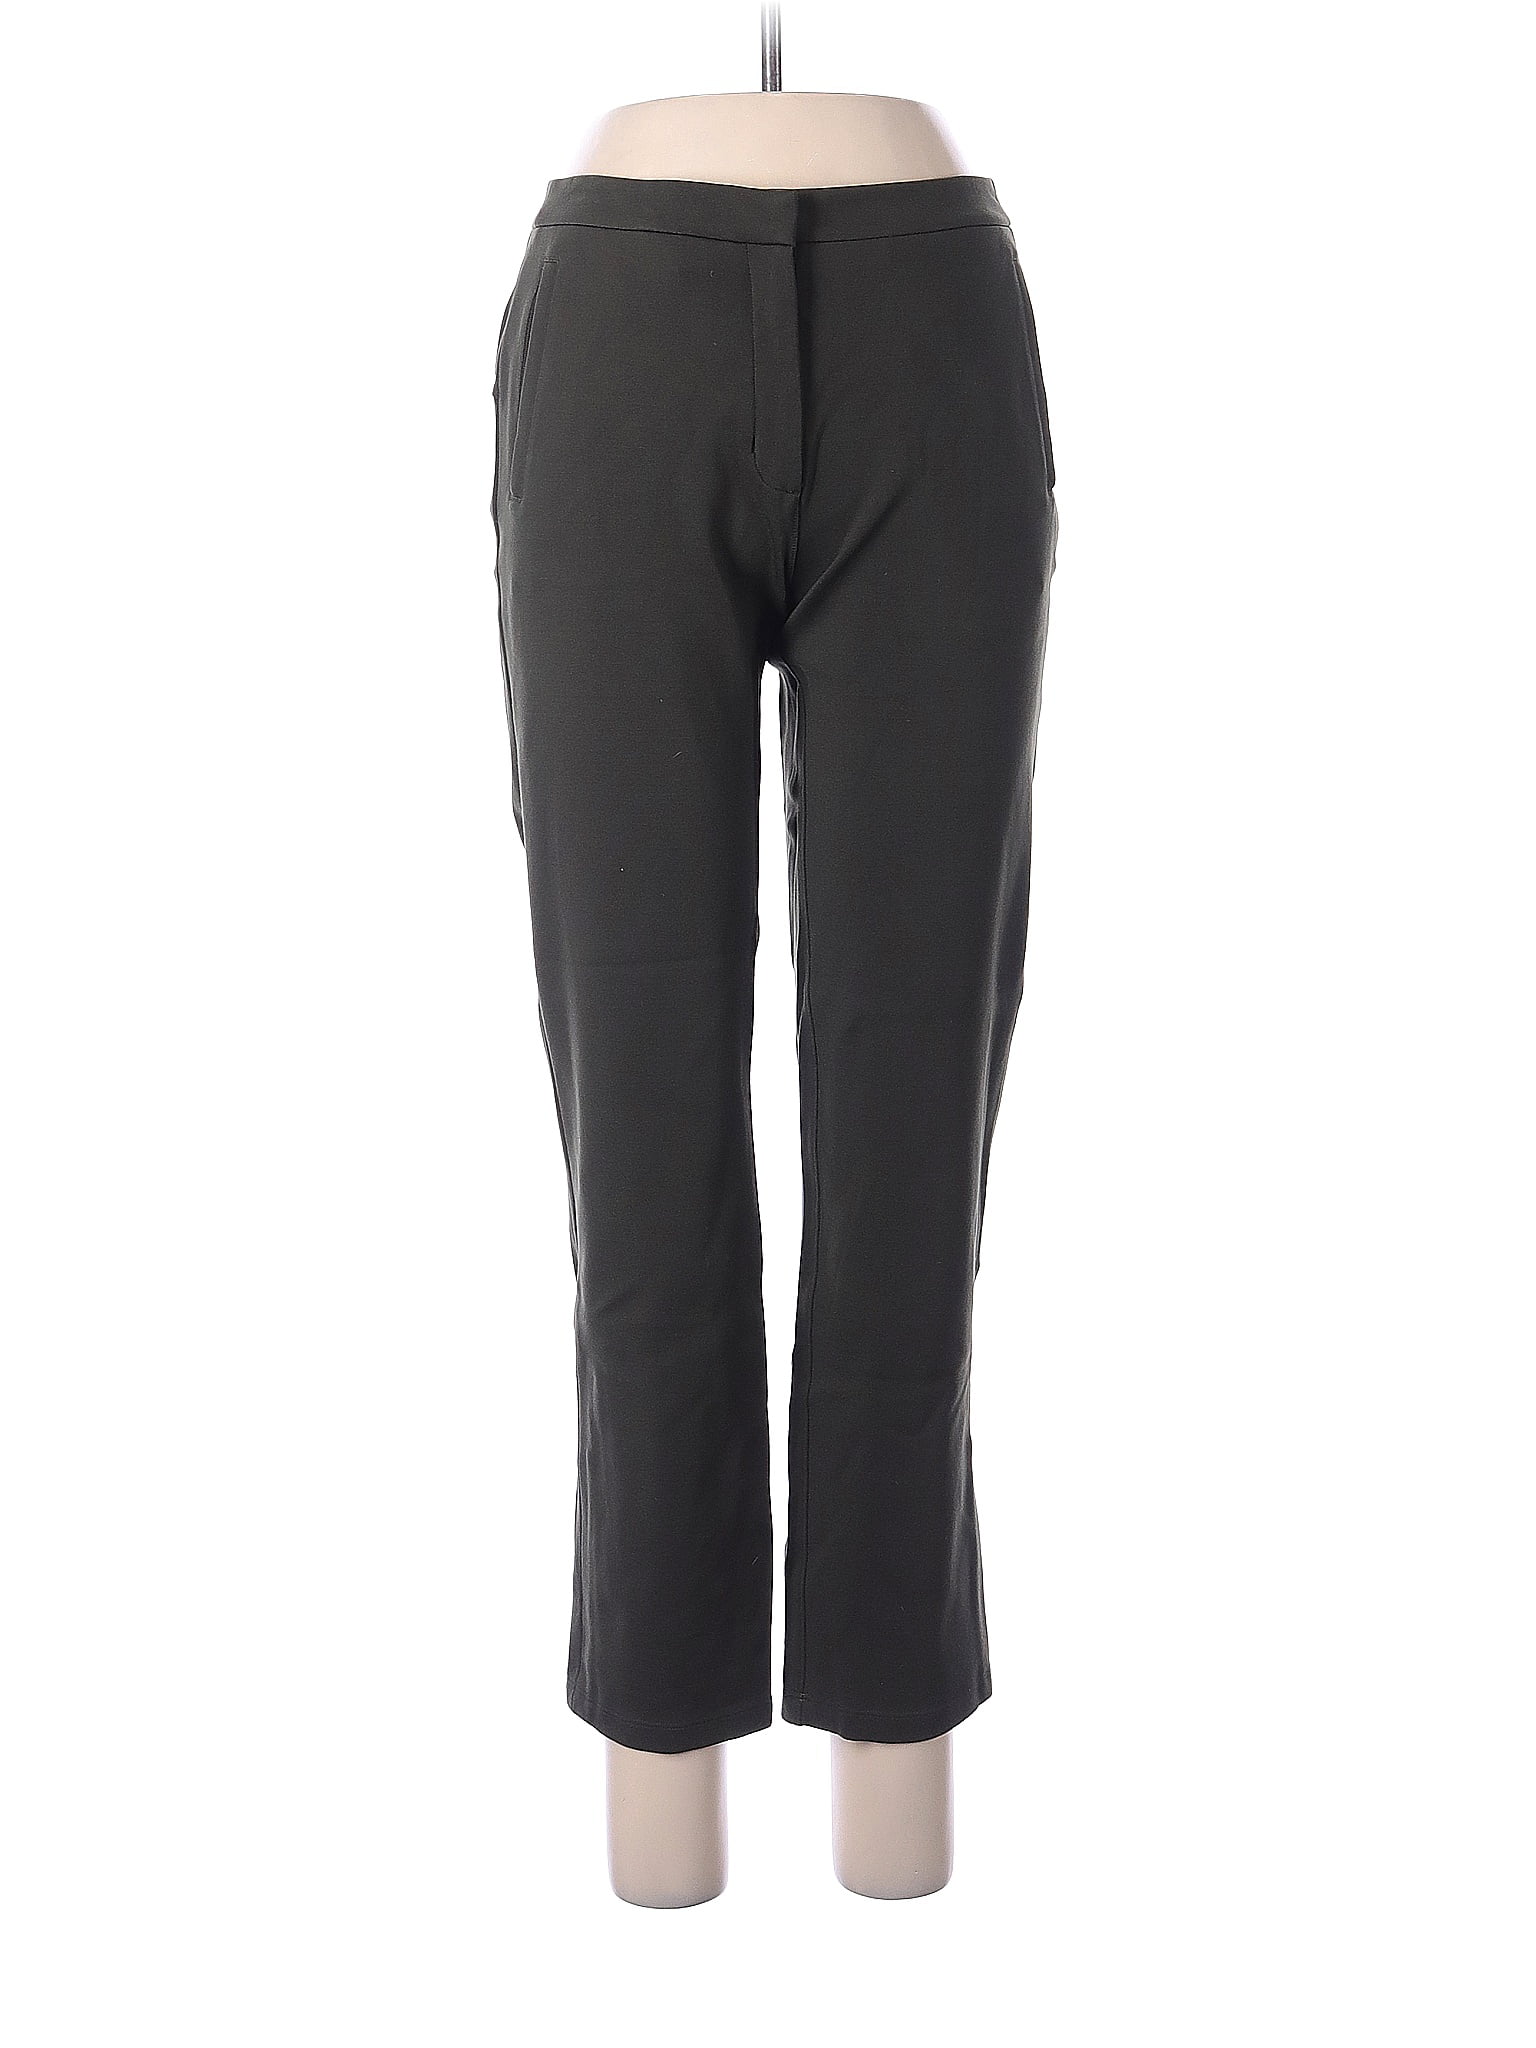 Pre-Owned Lululemon Athletica Womens Size 8 Track India